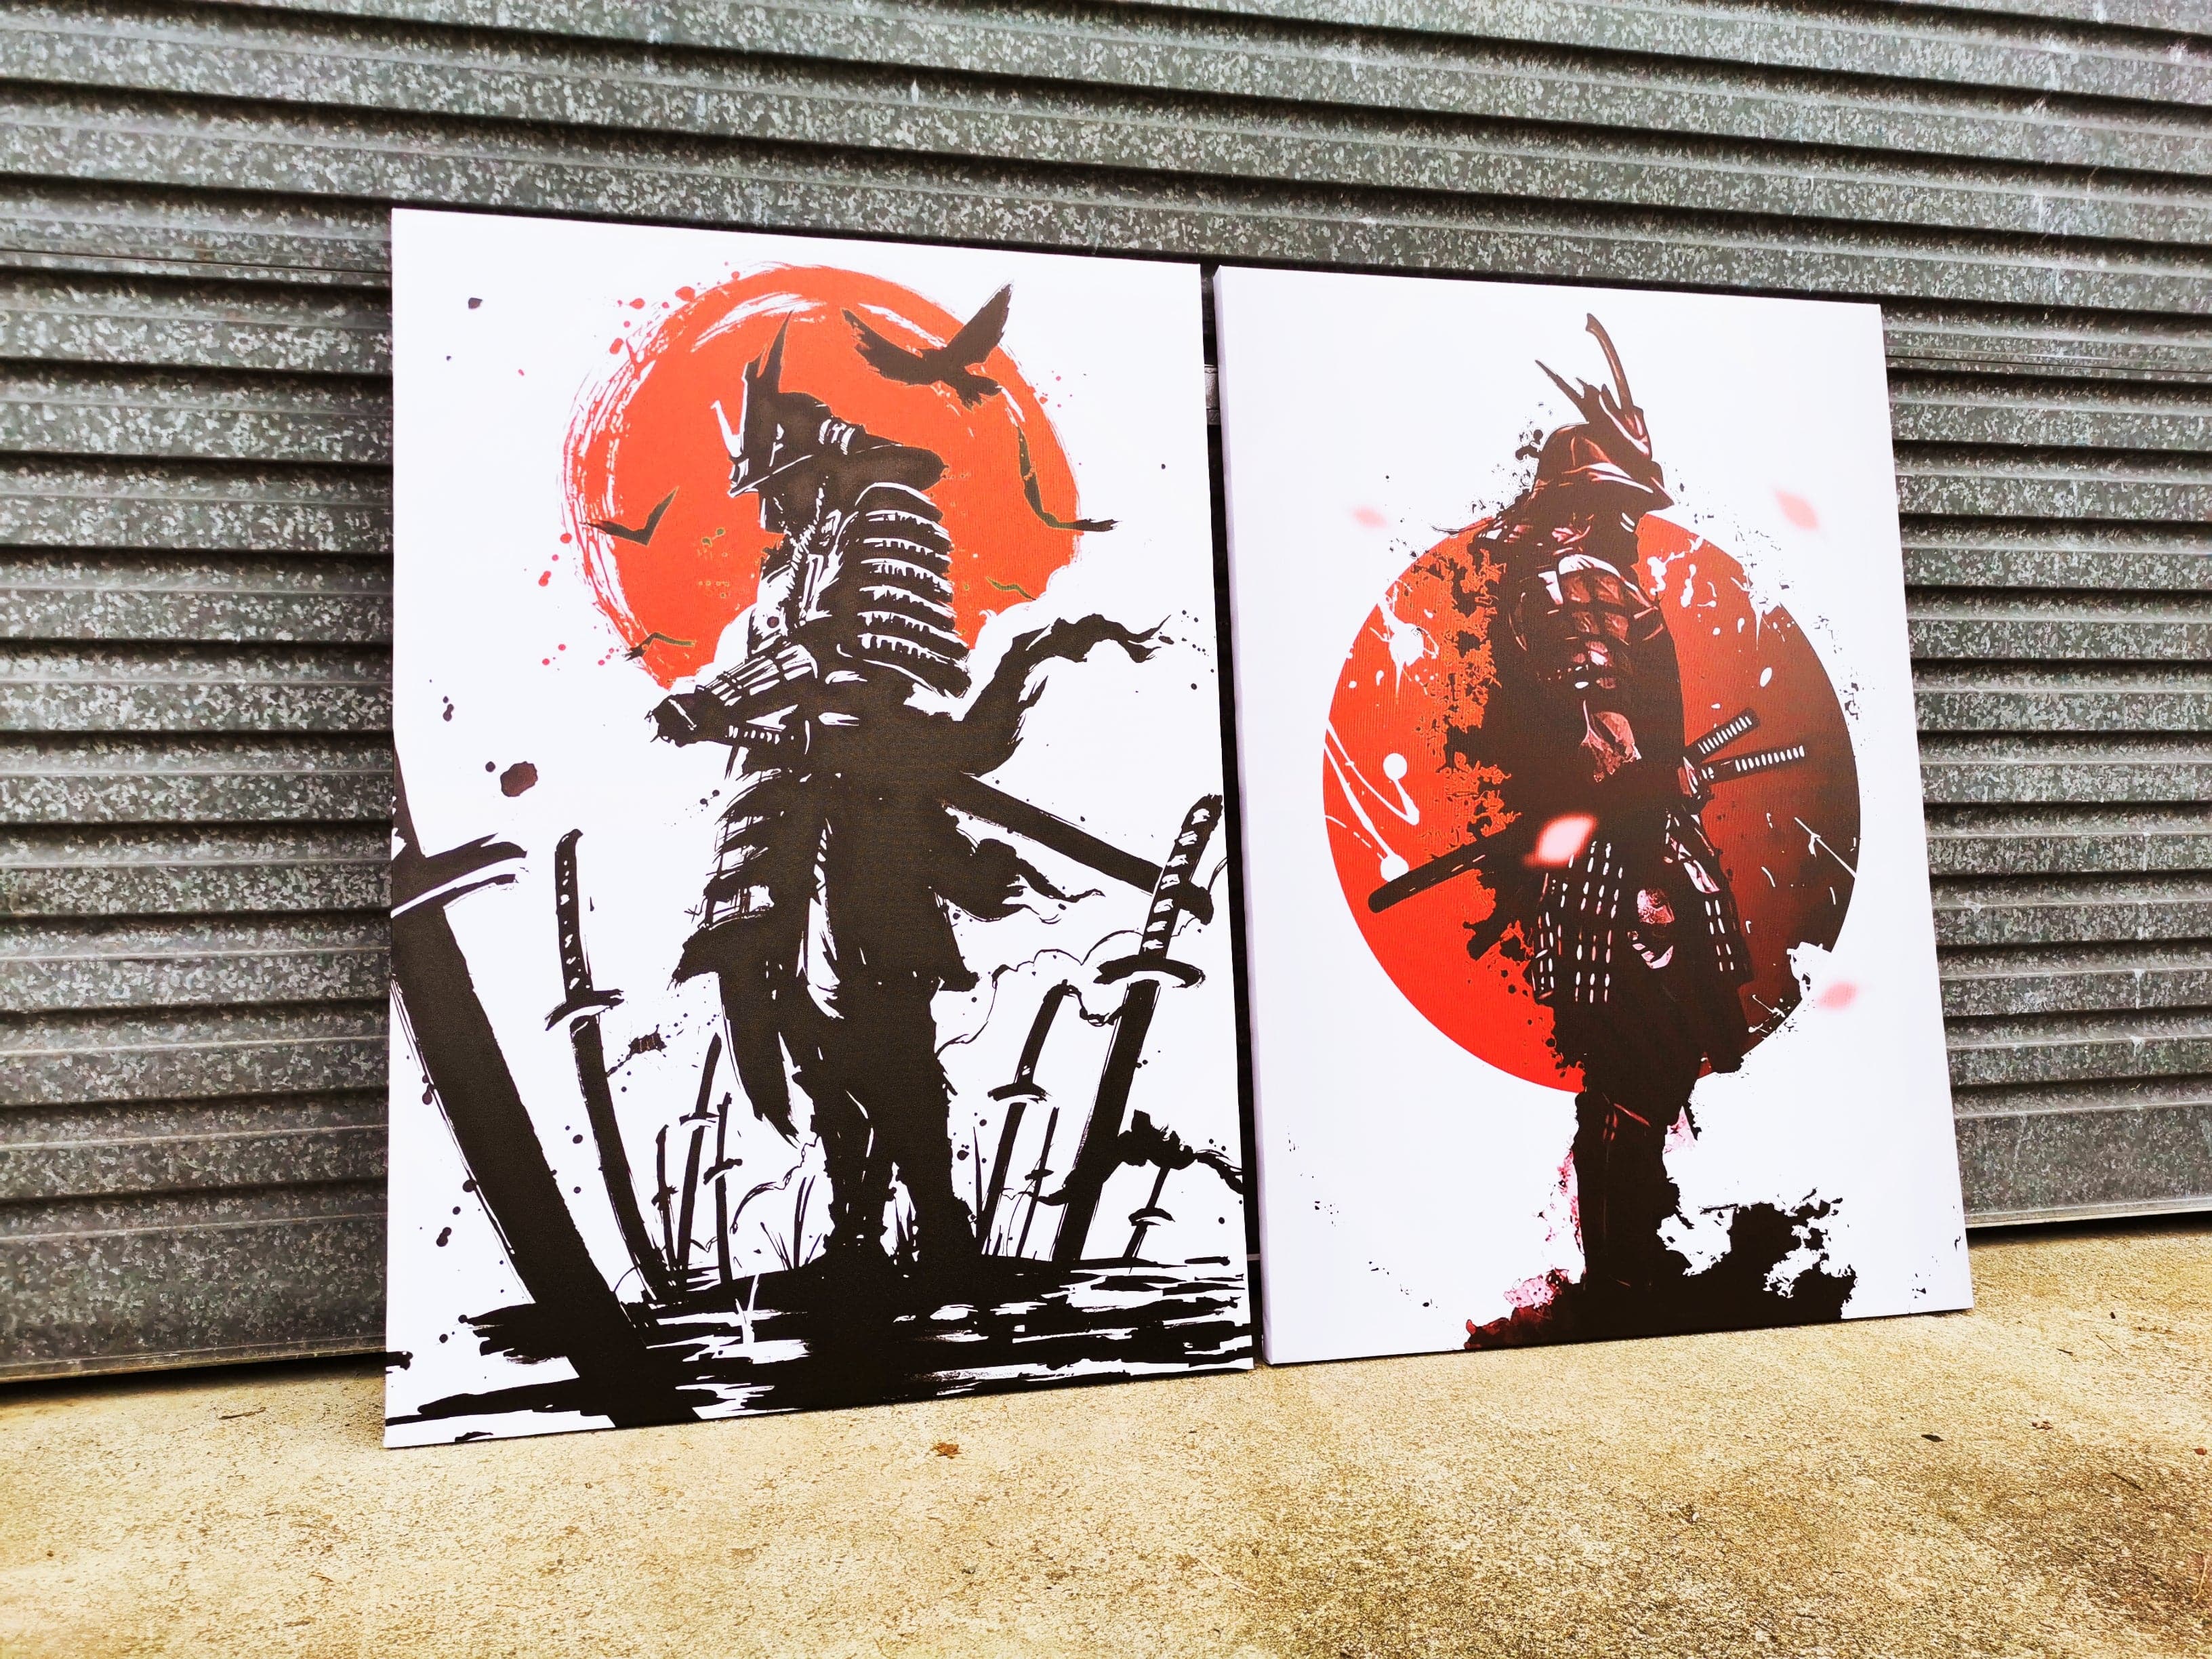 Framed 2 Panels - Finished Products - Samurai